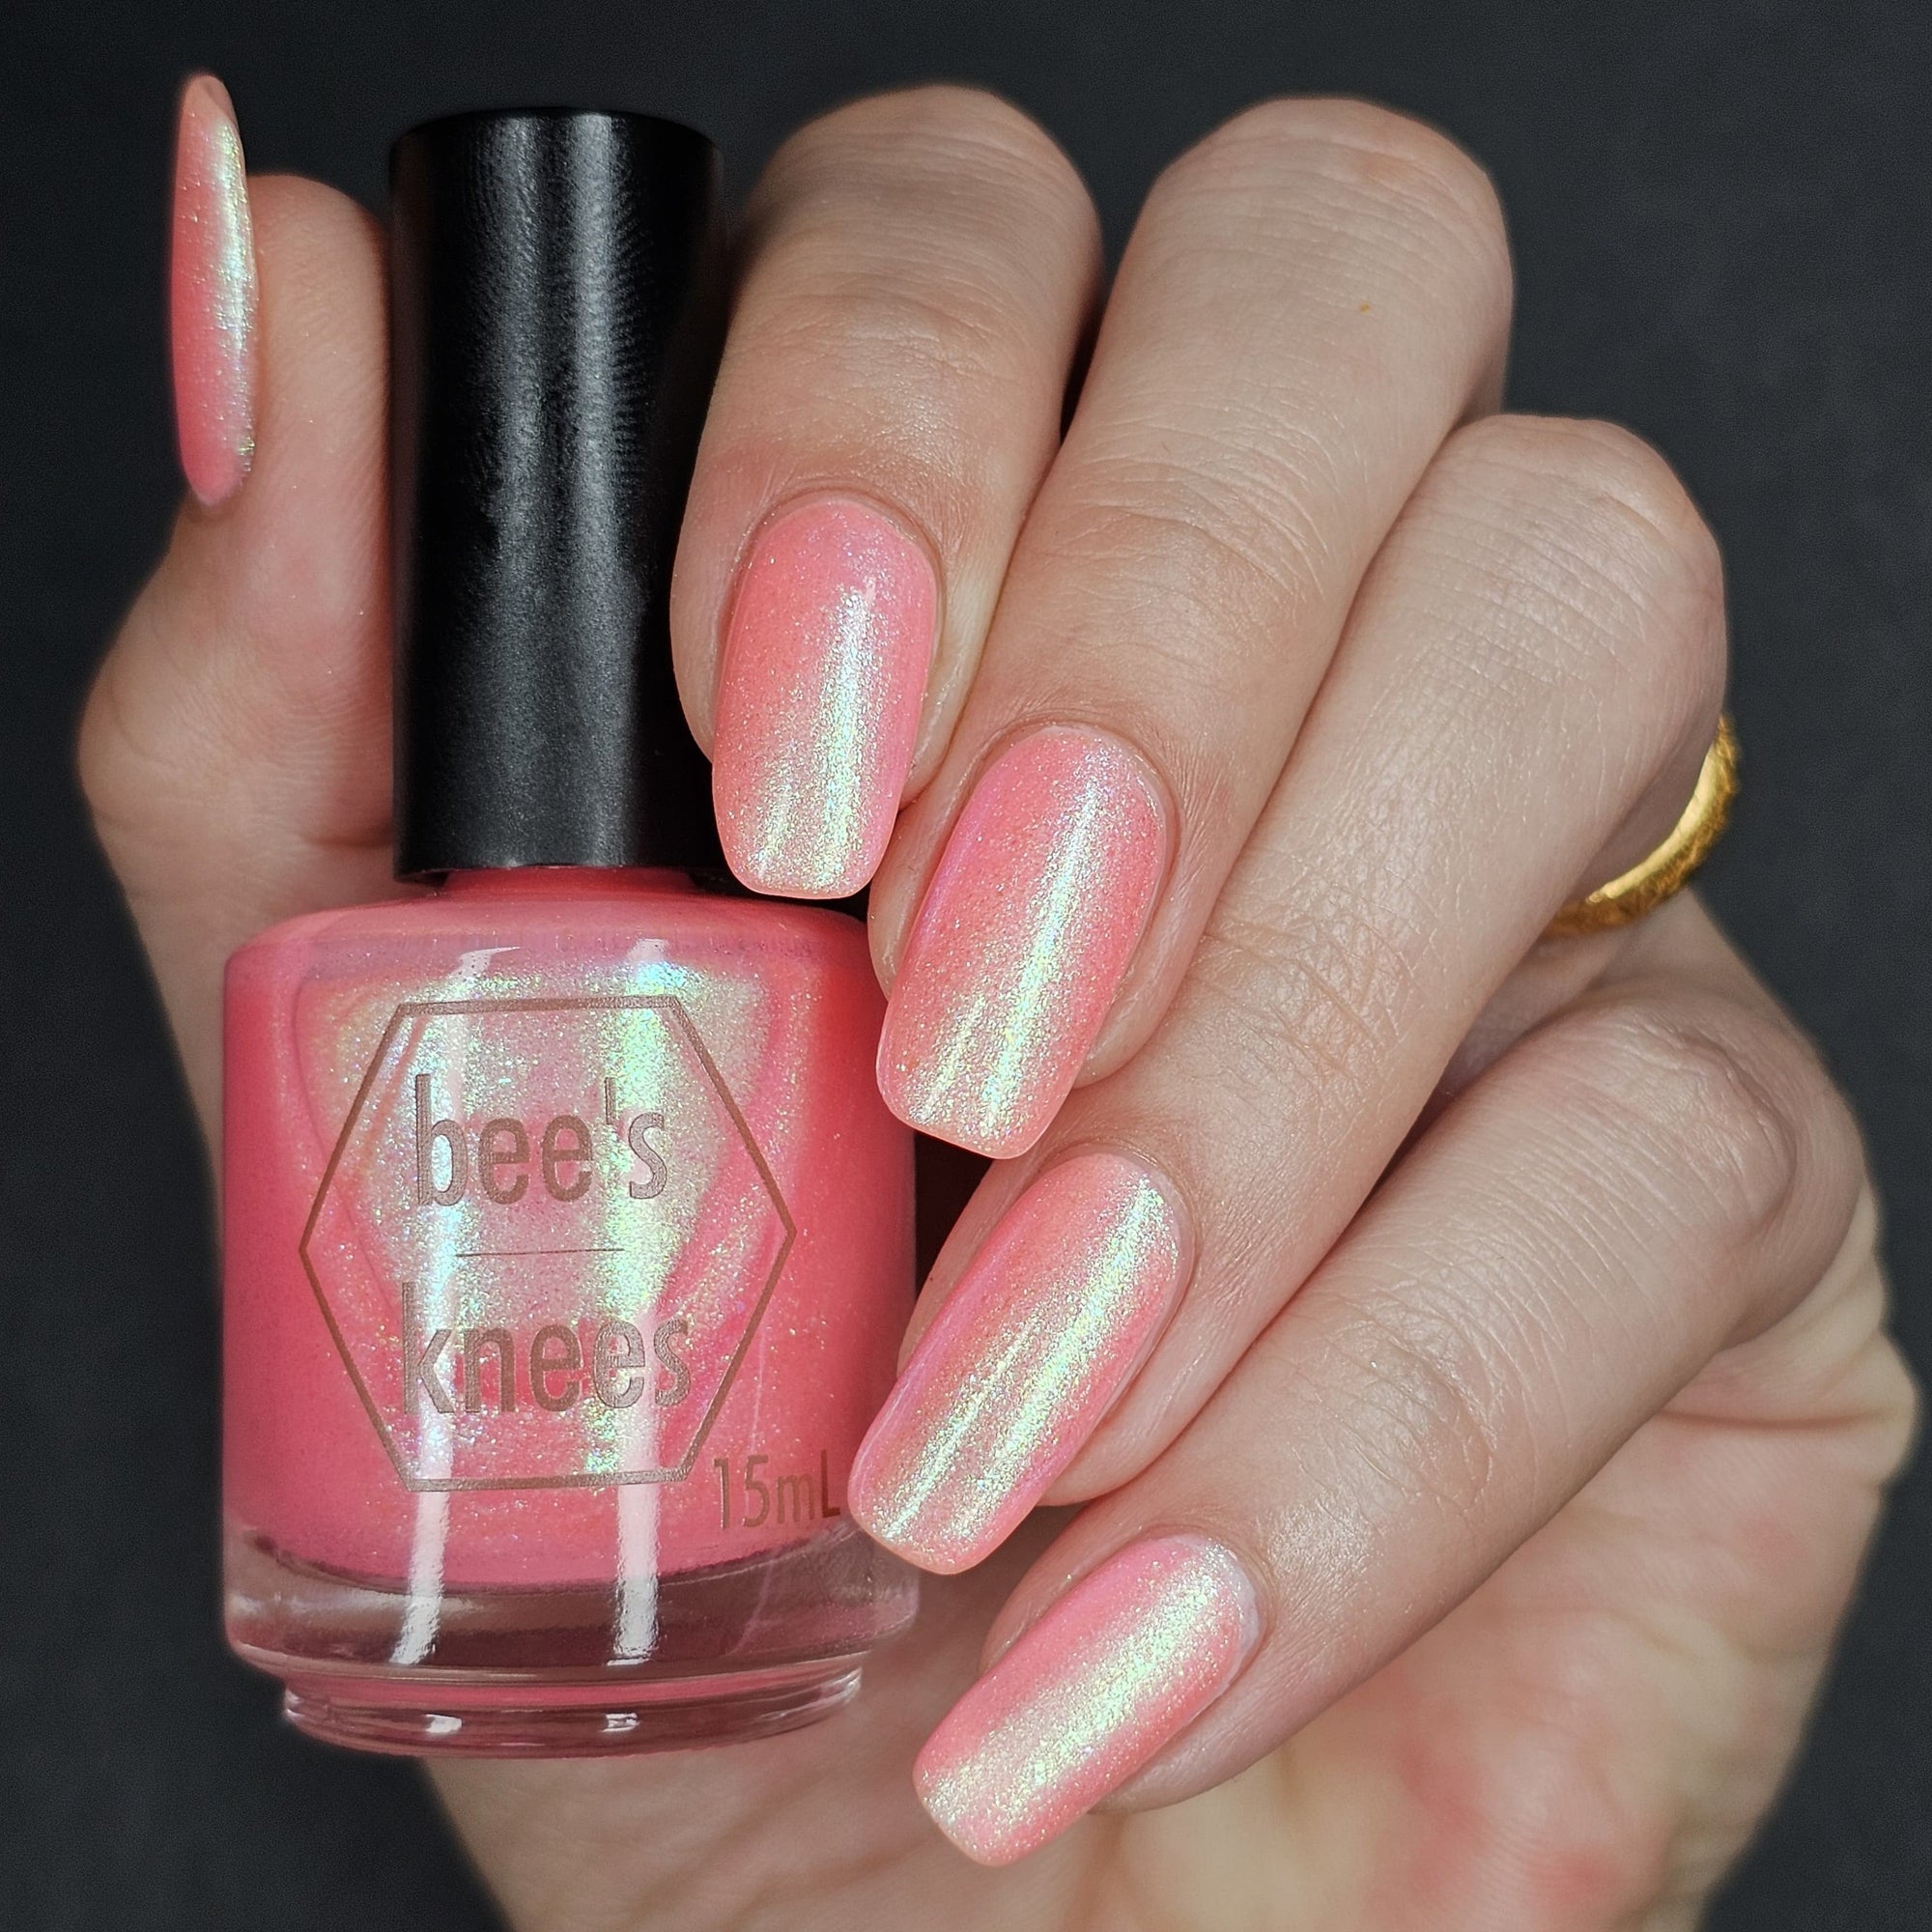 *PRE-ORDER* Bee's Knees Lacquer - True Greatness Lies Within